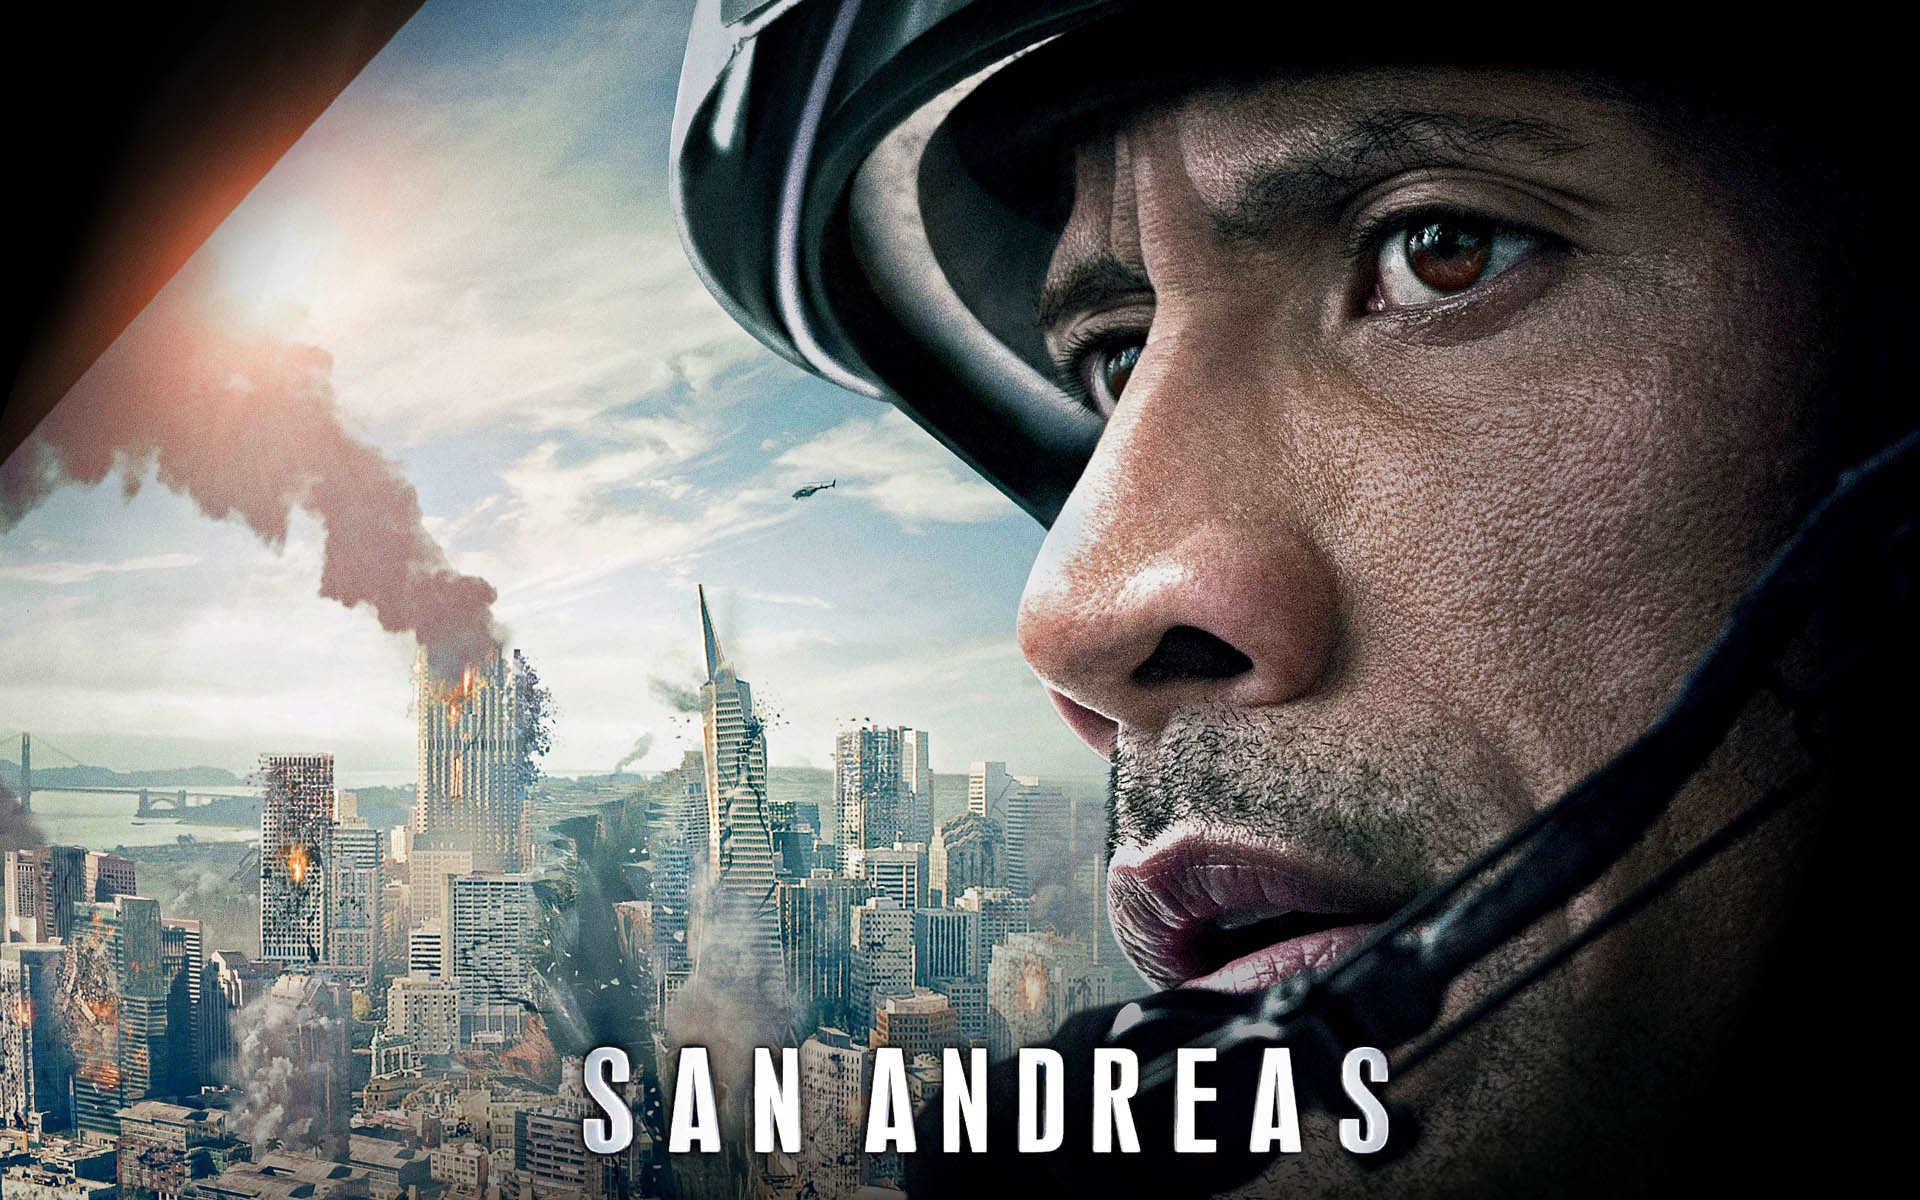 san andreas full movie online watch free